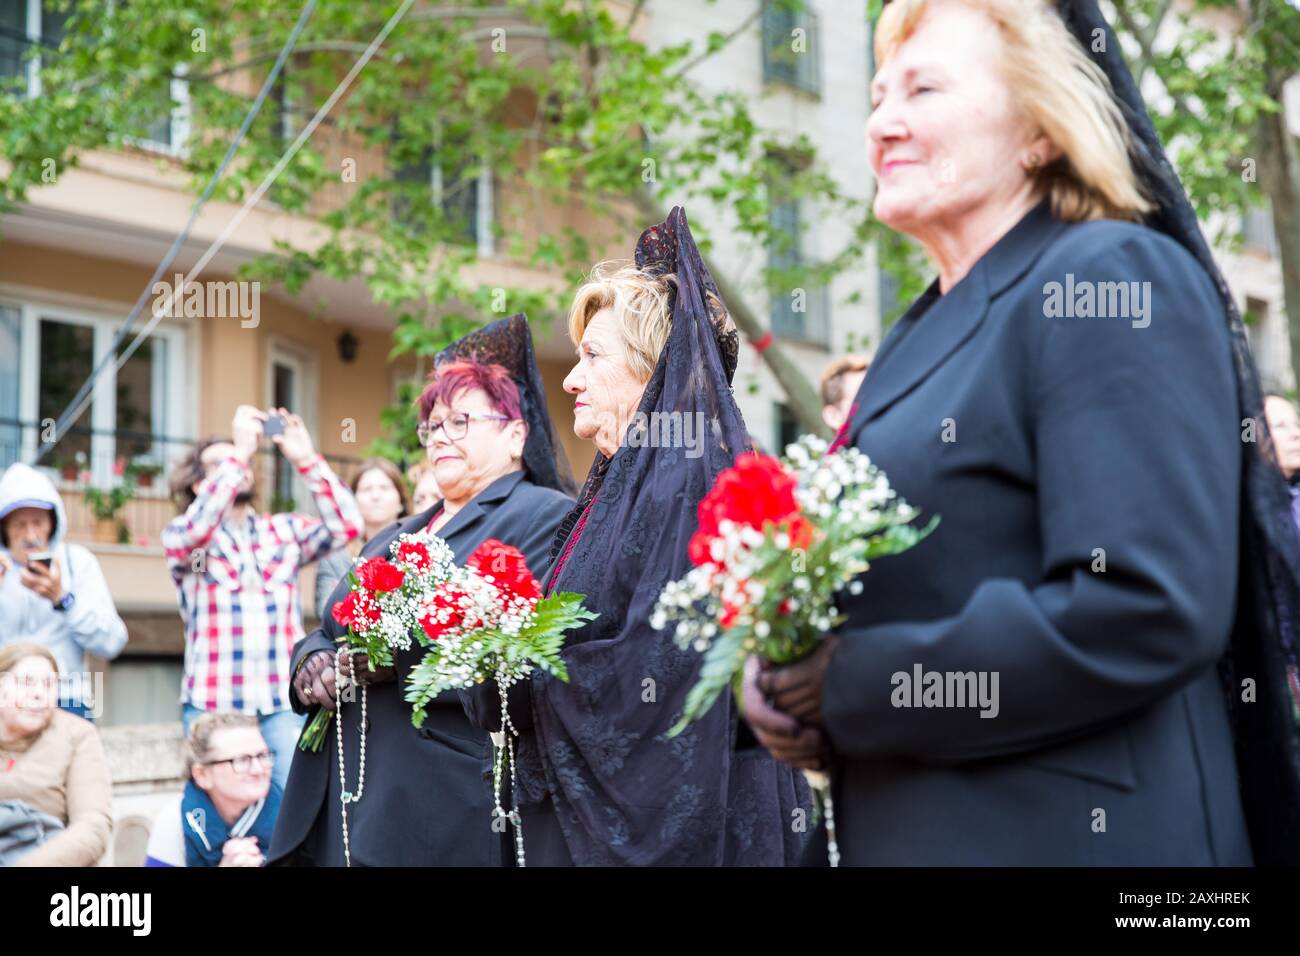 Holy Thursday procession of church brotherhood penitents. Women in black dresses and mantillas standing with flowers in hands Stock Photo